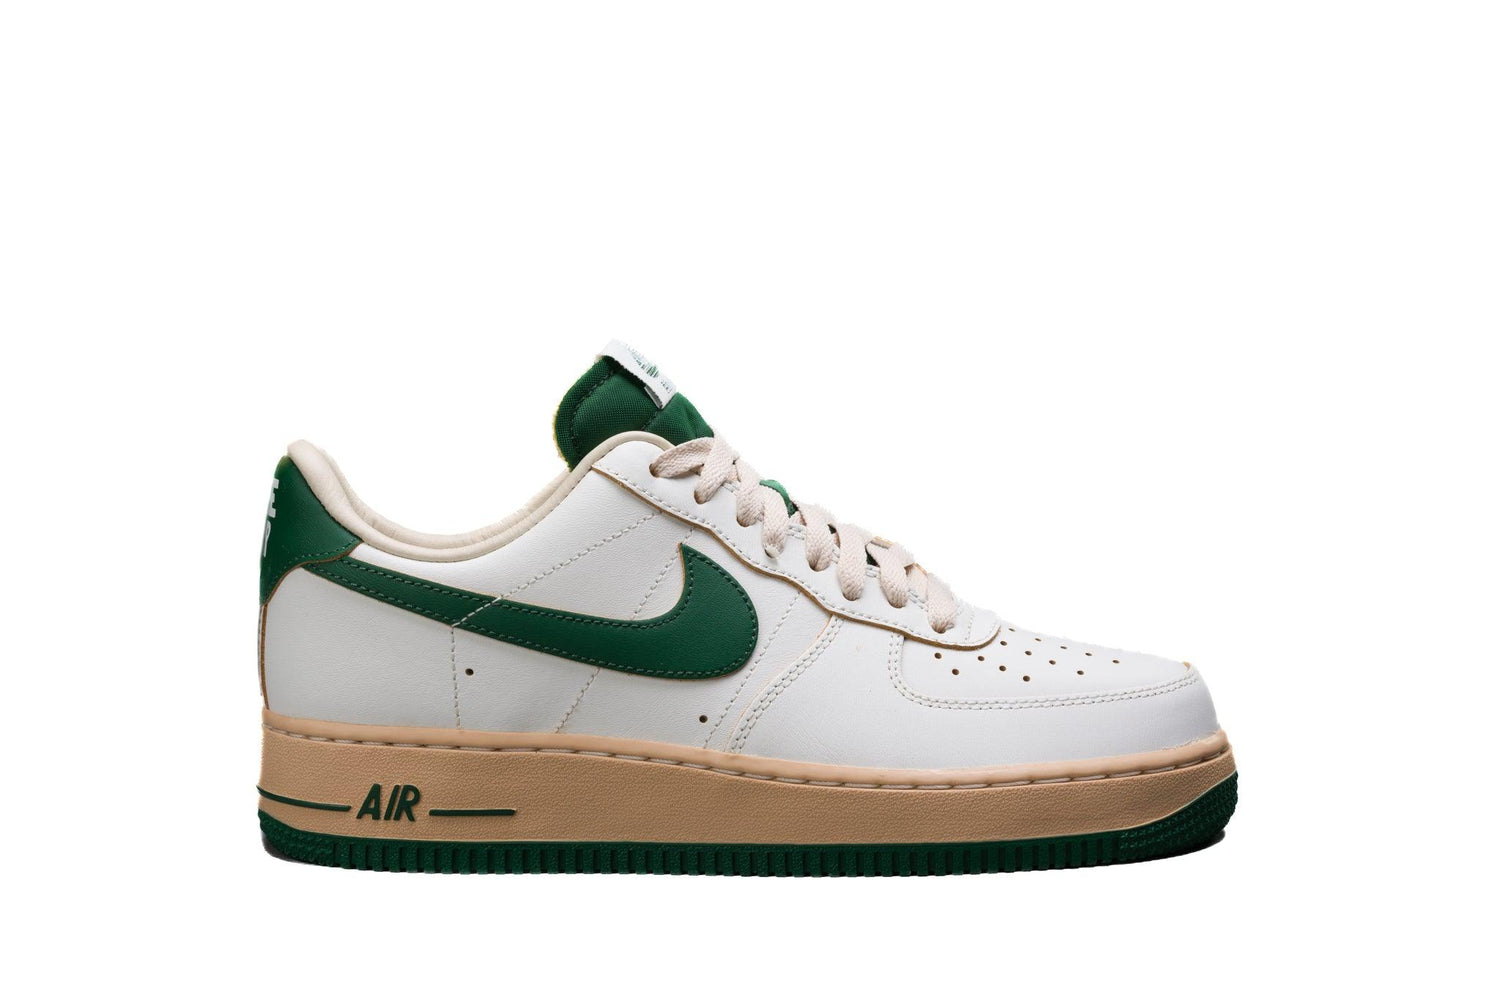 nike made air force 1 low vintage gorge green lo10m 6 1500x